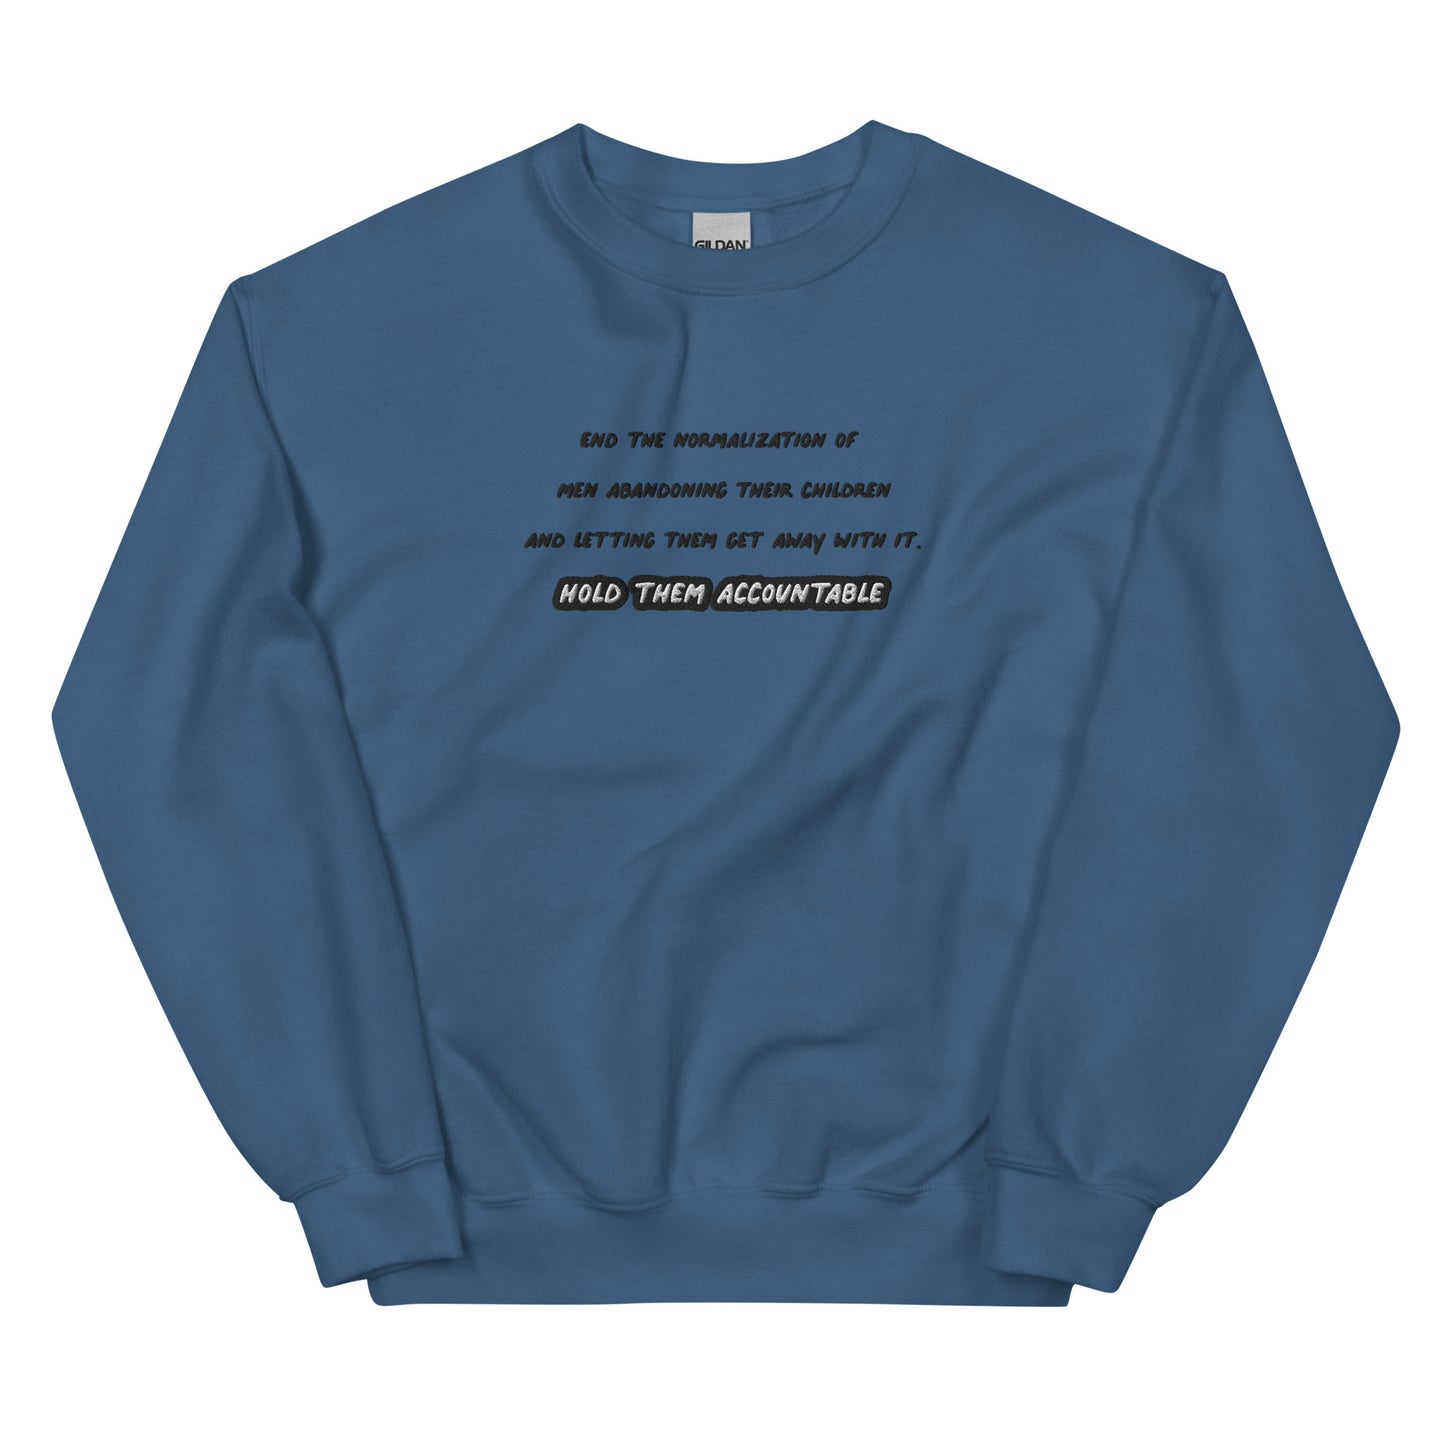 End The Normalization Of Men Abandoning Their Children Embroidered Unisex Sweatshirt